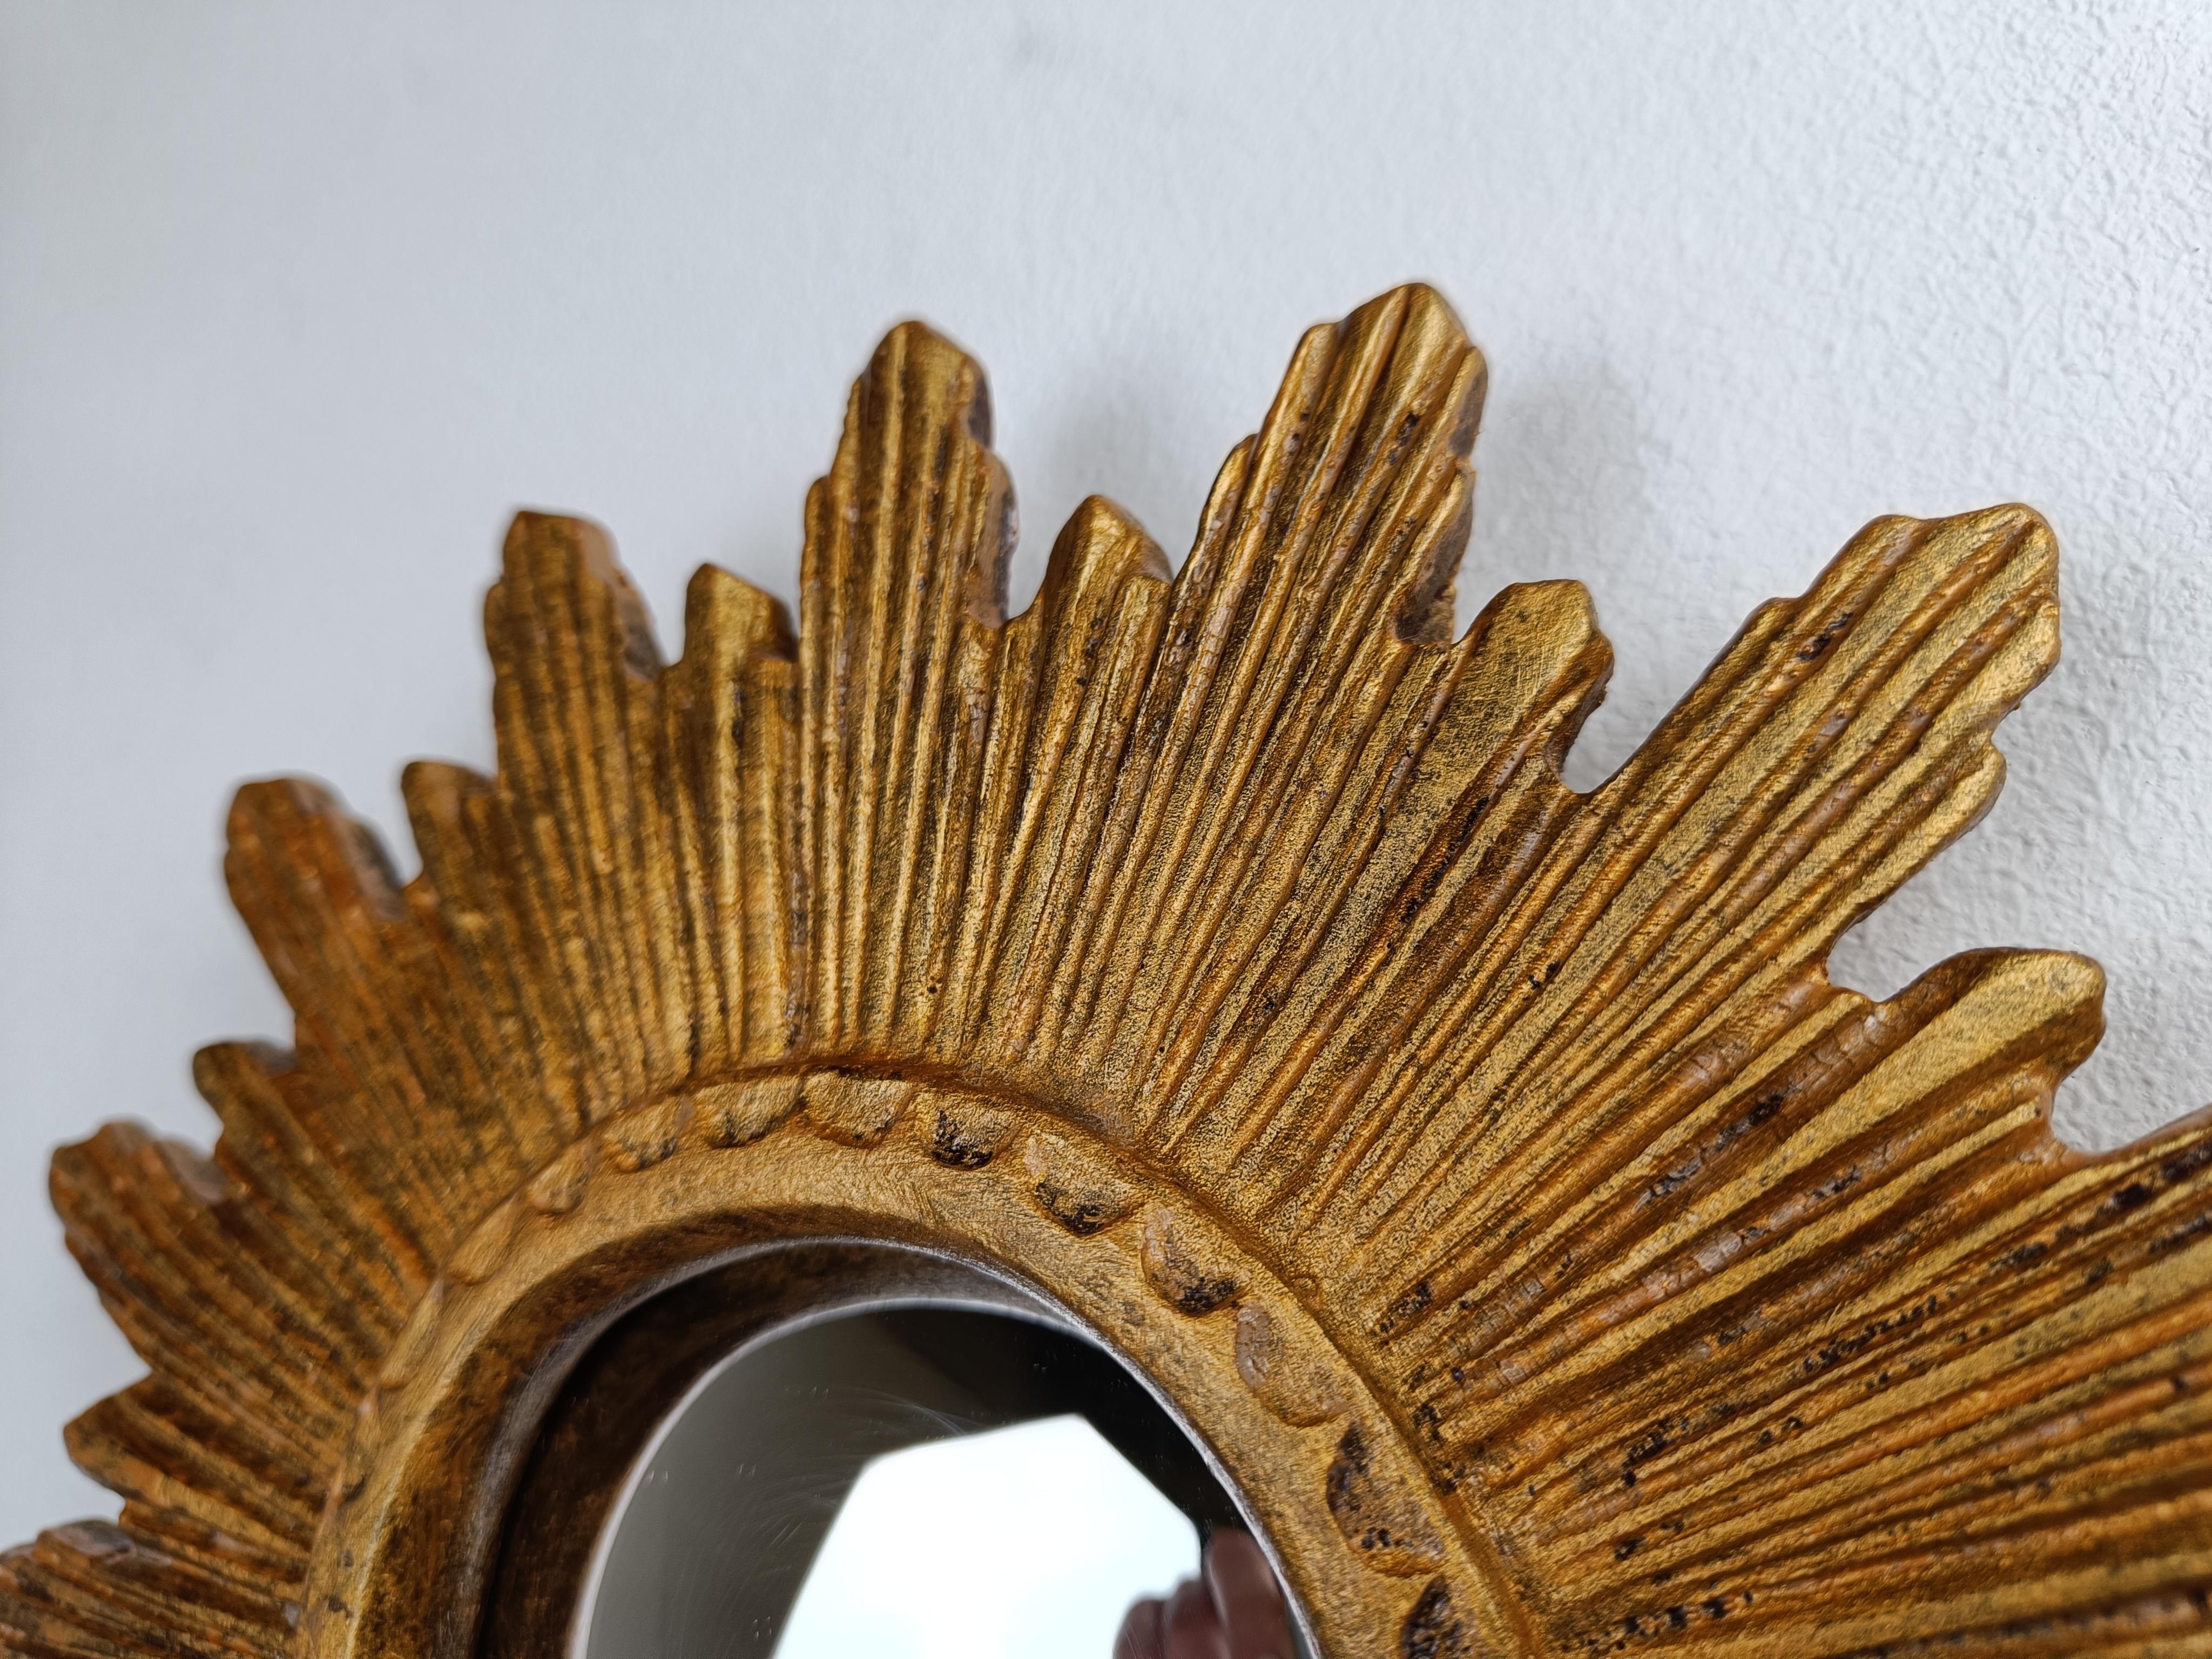 Gilded resin sunburst mirror with convex mirror glass.

The golden mirror is in a good condition.

1960s - made in Belgium.

Dimensions:
Diameter: 25cm/9.84